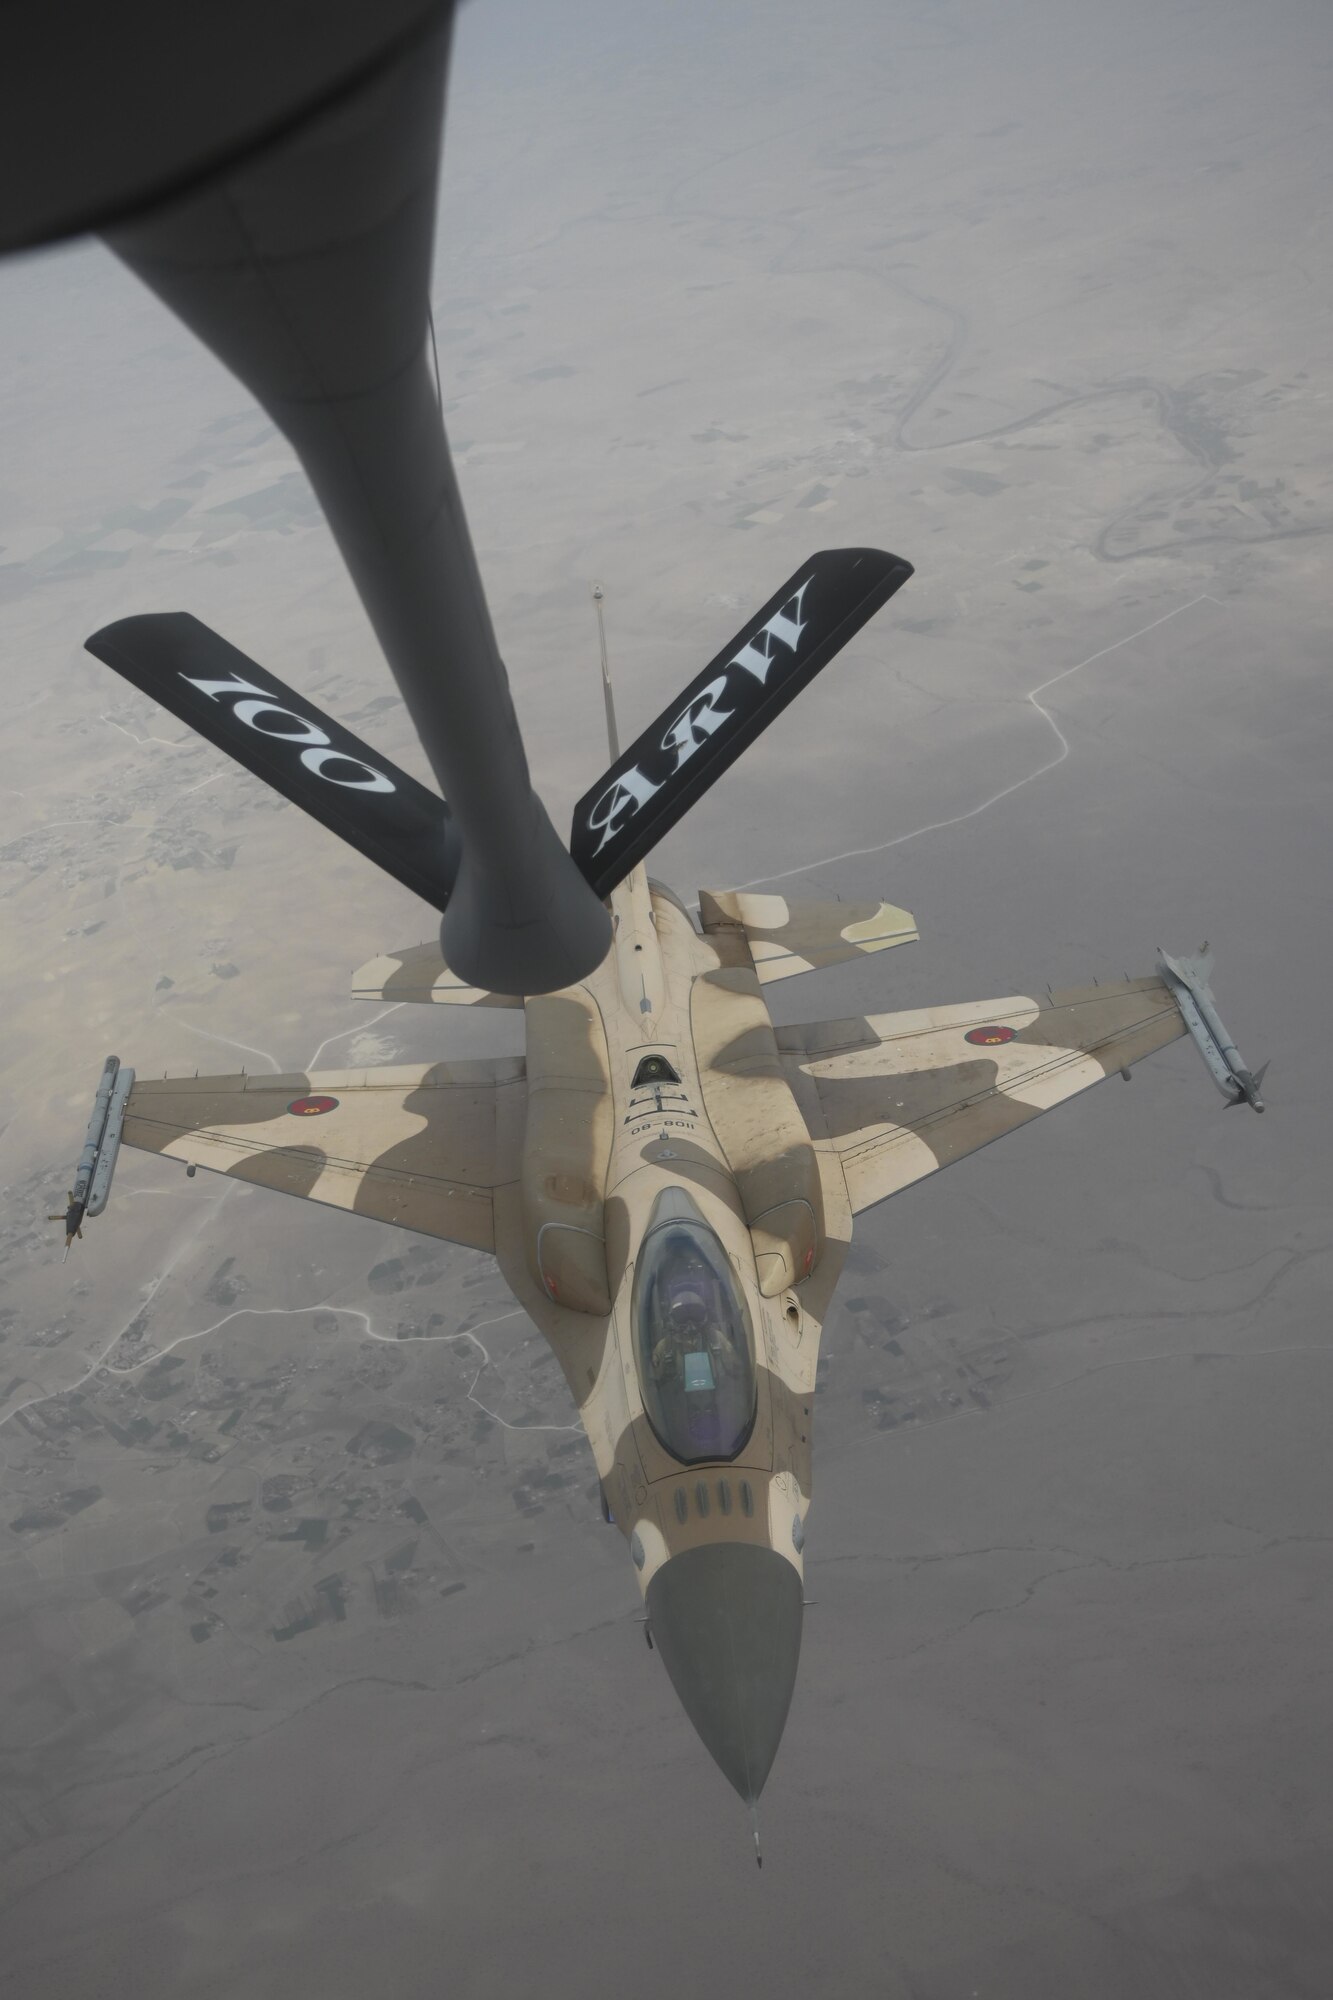 A Royal Moroccan Air Force F-16 Fighting Falcon aircraft approaches to conduct air refueling with a U.S. Air Force KC-135 Stratotanker aircraft over Morocco during Exercise African Lion 2021, June 15, 2021. African Lion promotes the U.S. as the partner of choice in Africa and encourages other African nations to consider partnership opportunities with the U.S.



African Lion is U.S. Africa Command's largest, premier, joint, annual exercise hosted by Morocco, Tunisia and Senegal, 7-18 June. More than 7,000 participants from nine nations and NATO train together with a focus on enhancing readiness for U.S. and partner nation forces. African Lion is a multi-domain, multi-component, and multi-national exercise, which employs a full array of mission capabilities with the goal to strengthen interoperability among participants. (U.S. Air Force photo by Senior Airman Joseph Barron)